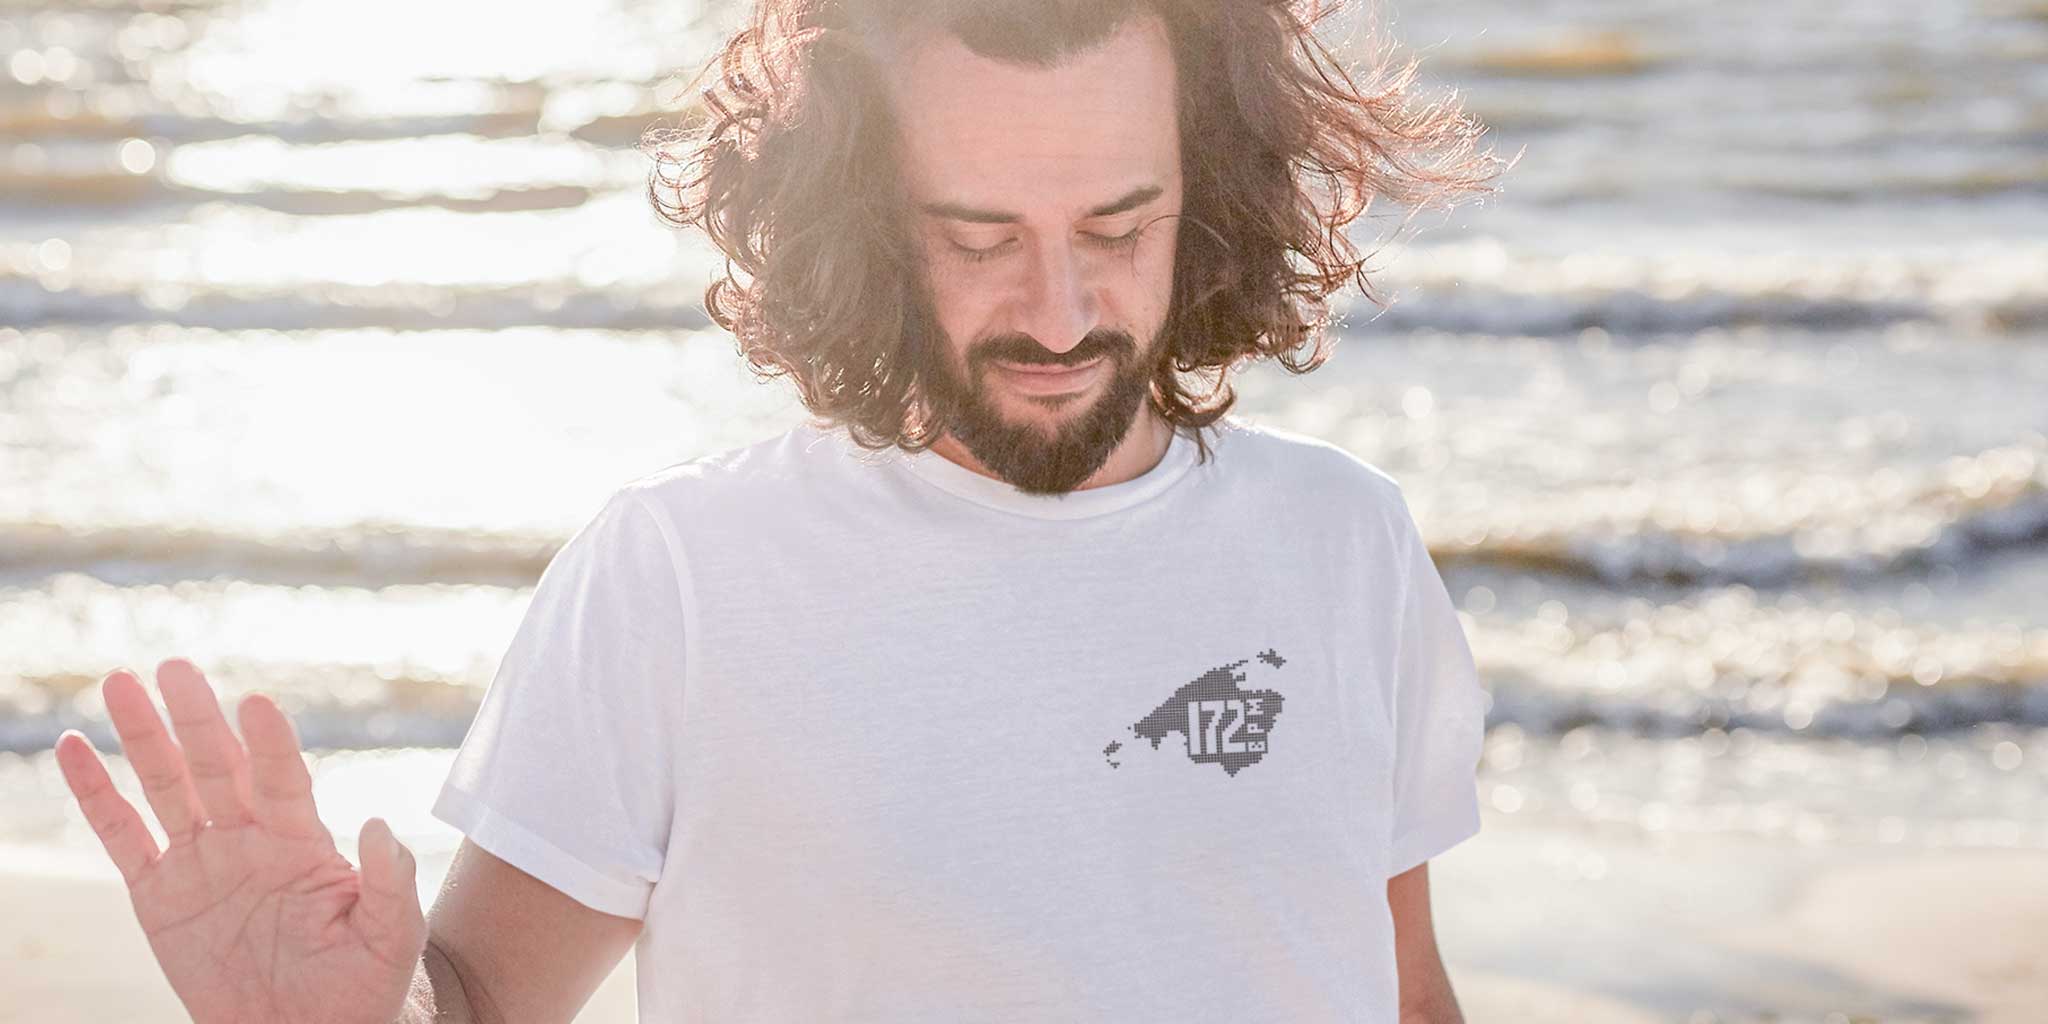 A man with long hair walking by the sea wearing a Balearic Breaks 172 BPM oversized t-shirt